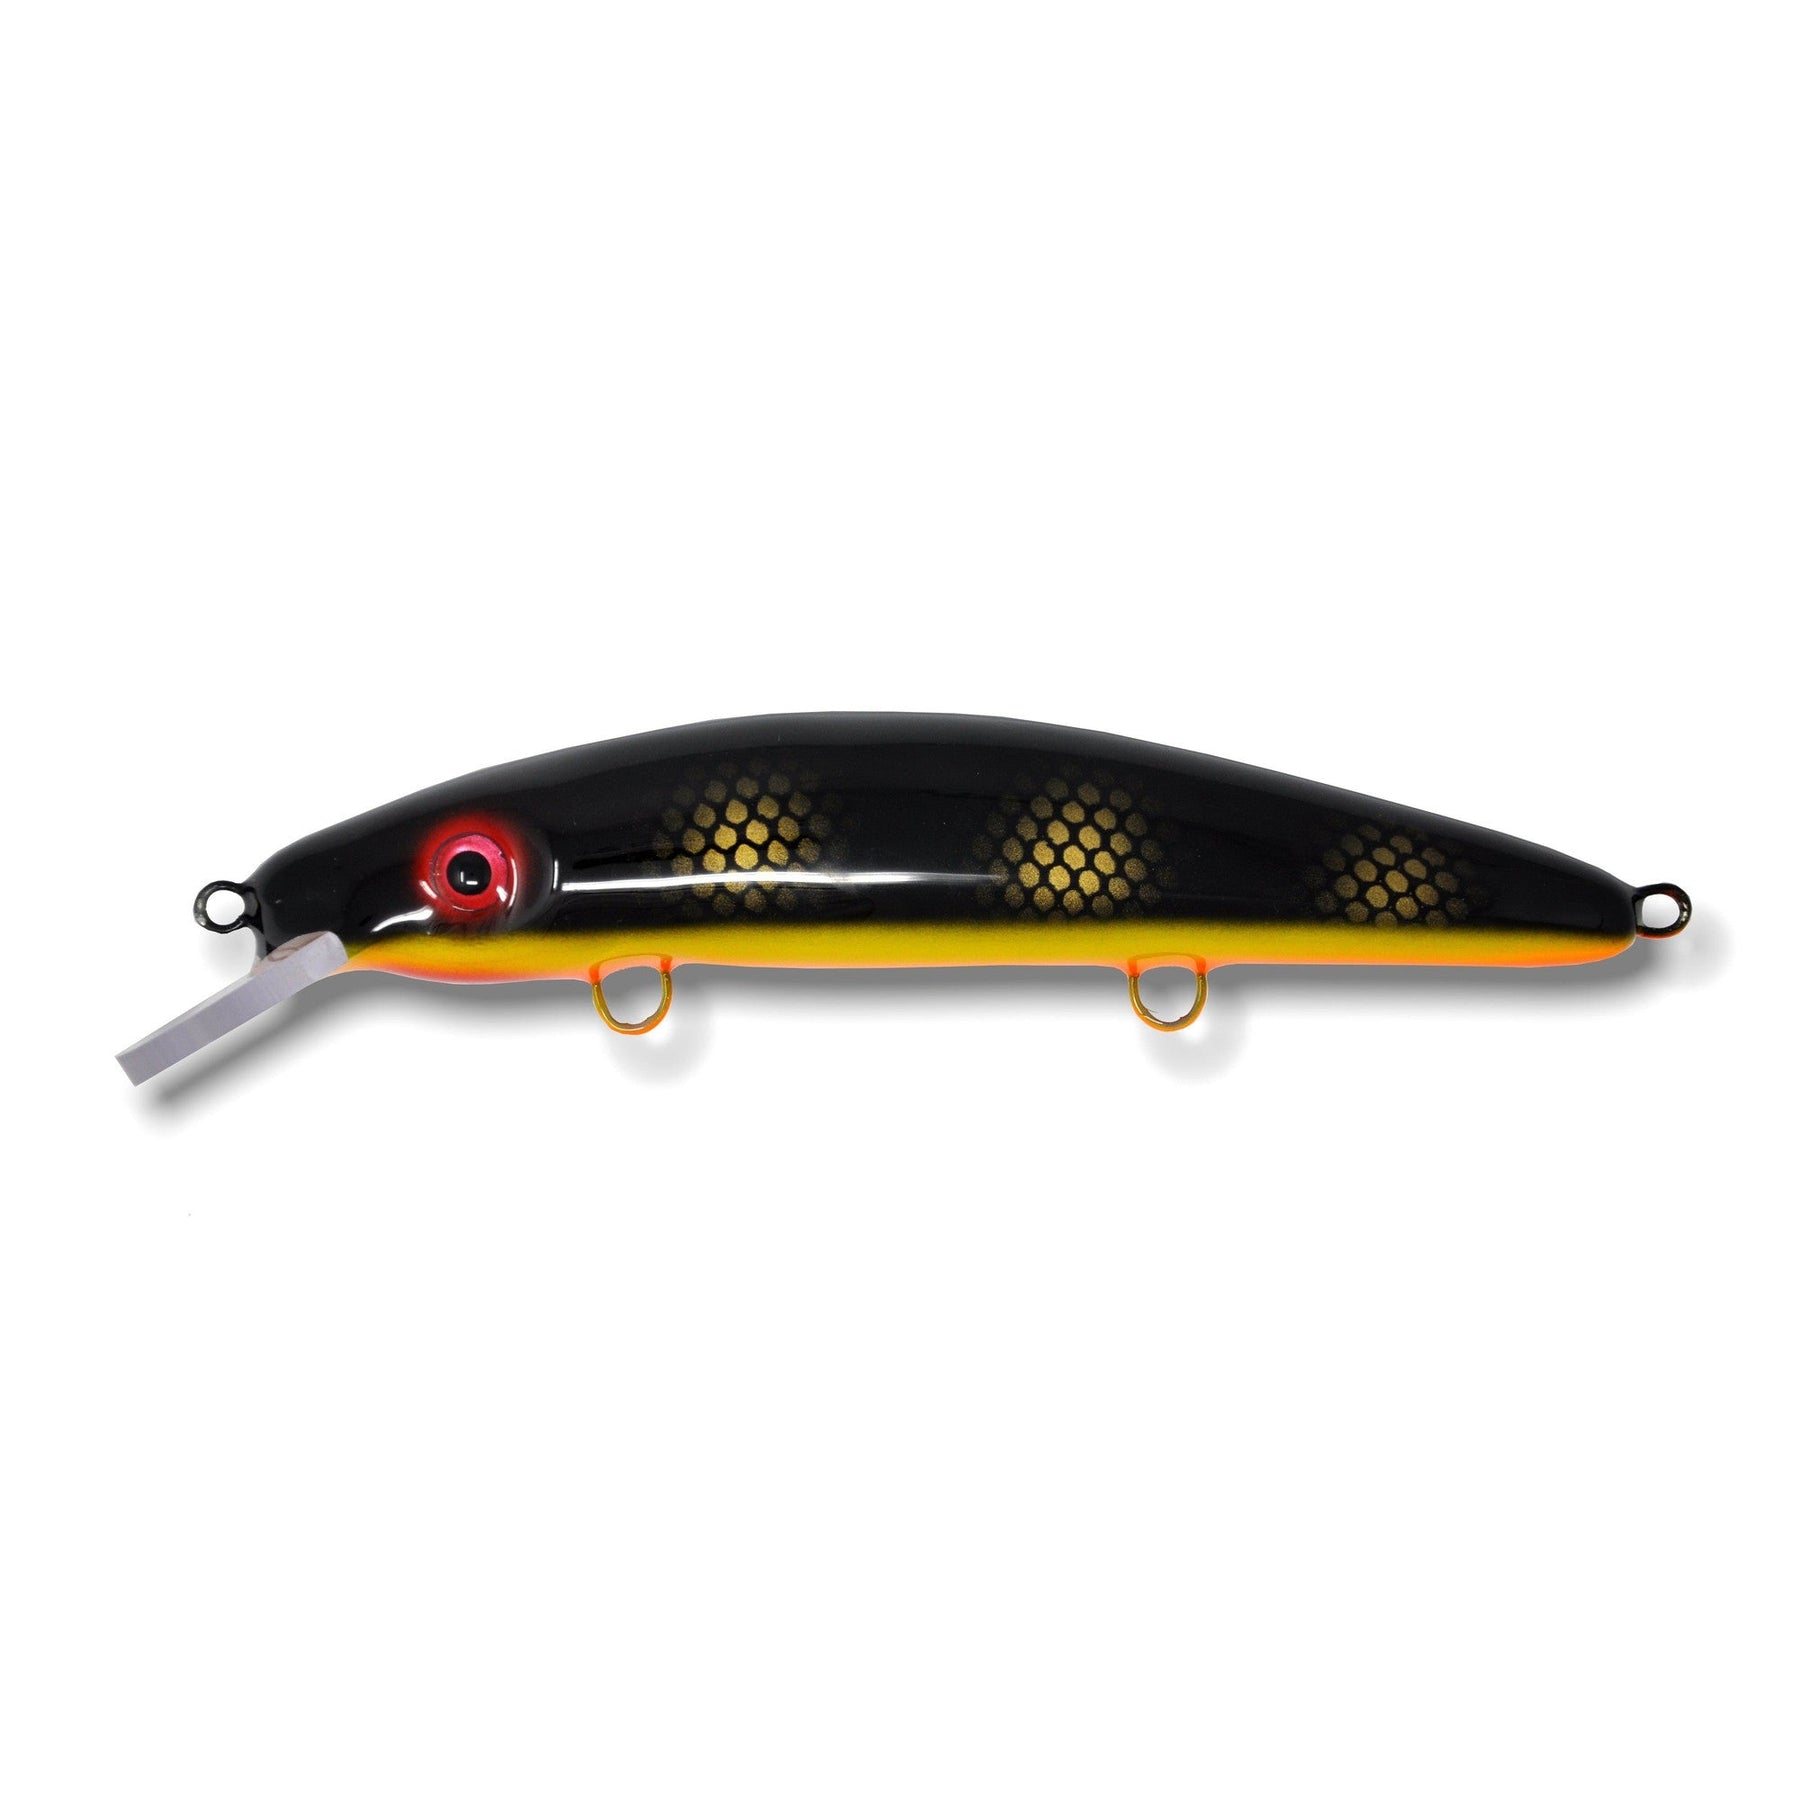 View of Crankbaits Blue Water Baits 9" cisco - shallow Crankbait Black Perch / Orange Belly available at EZOKO Pike and Musky Shop